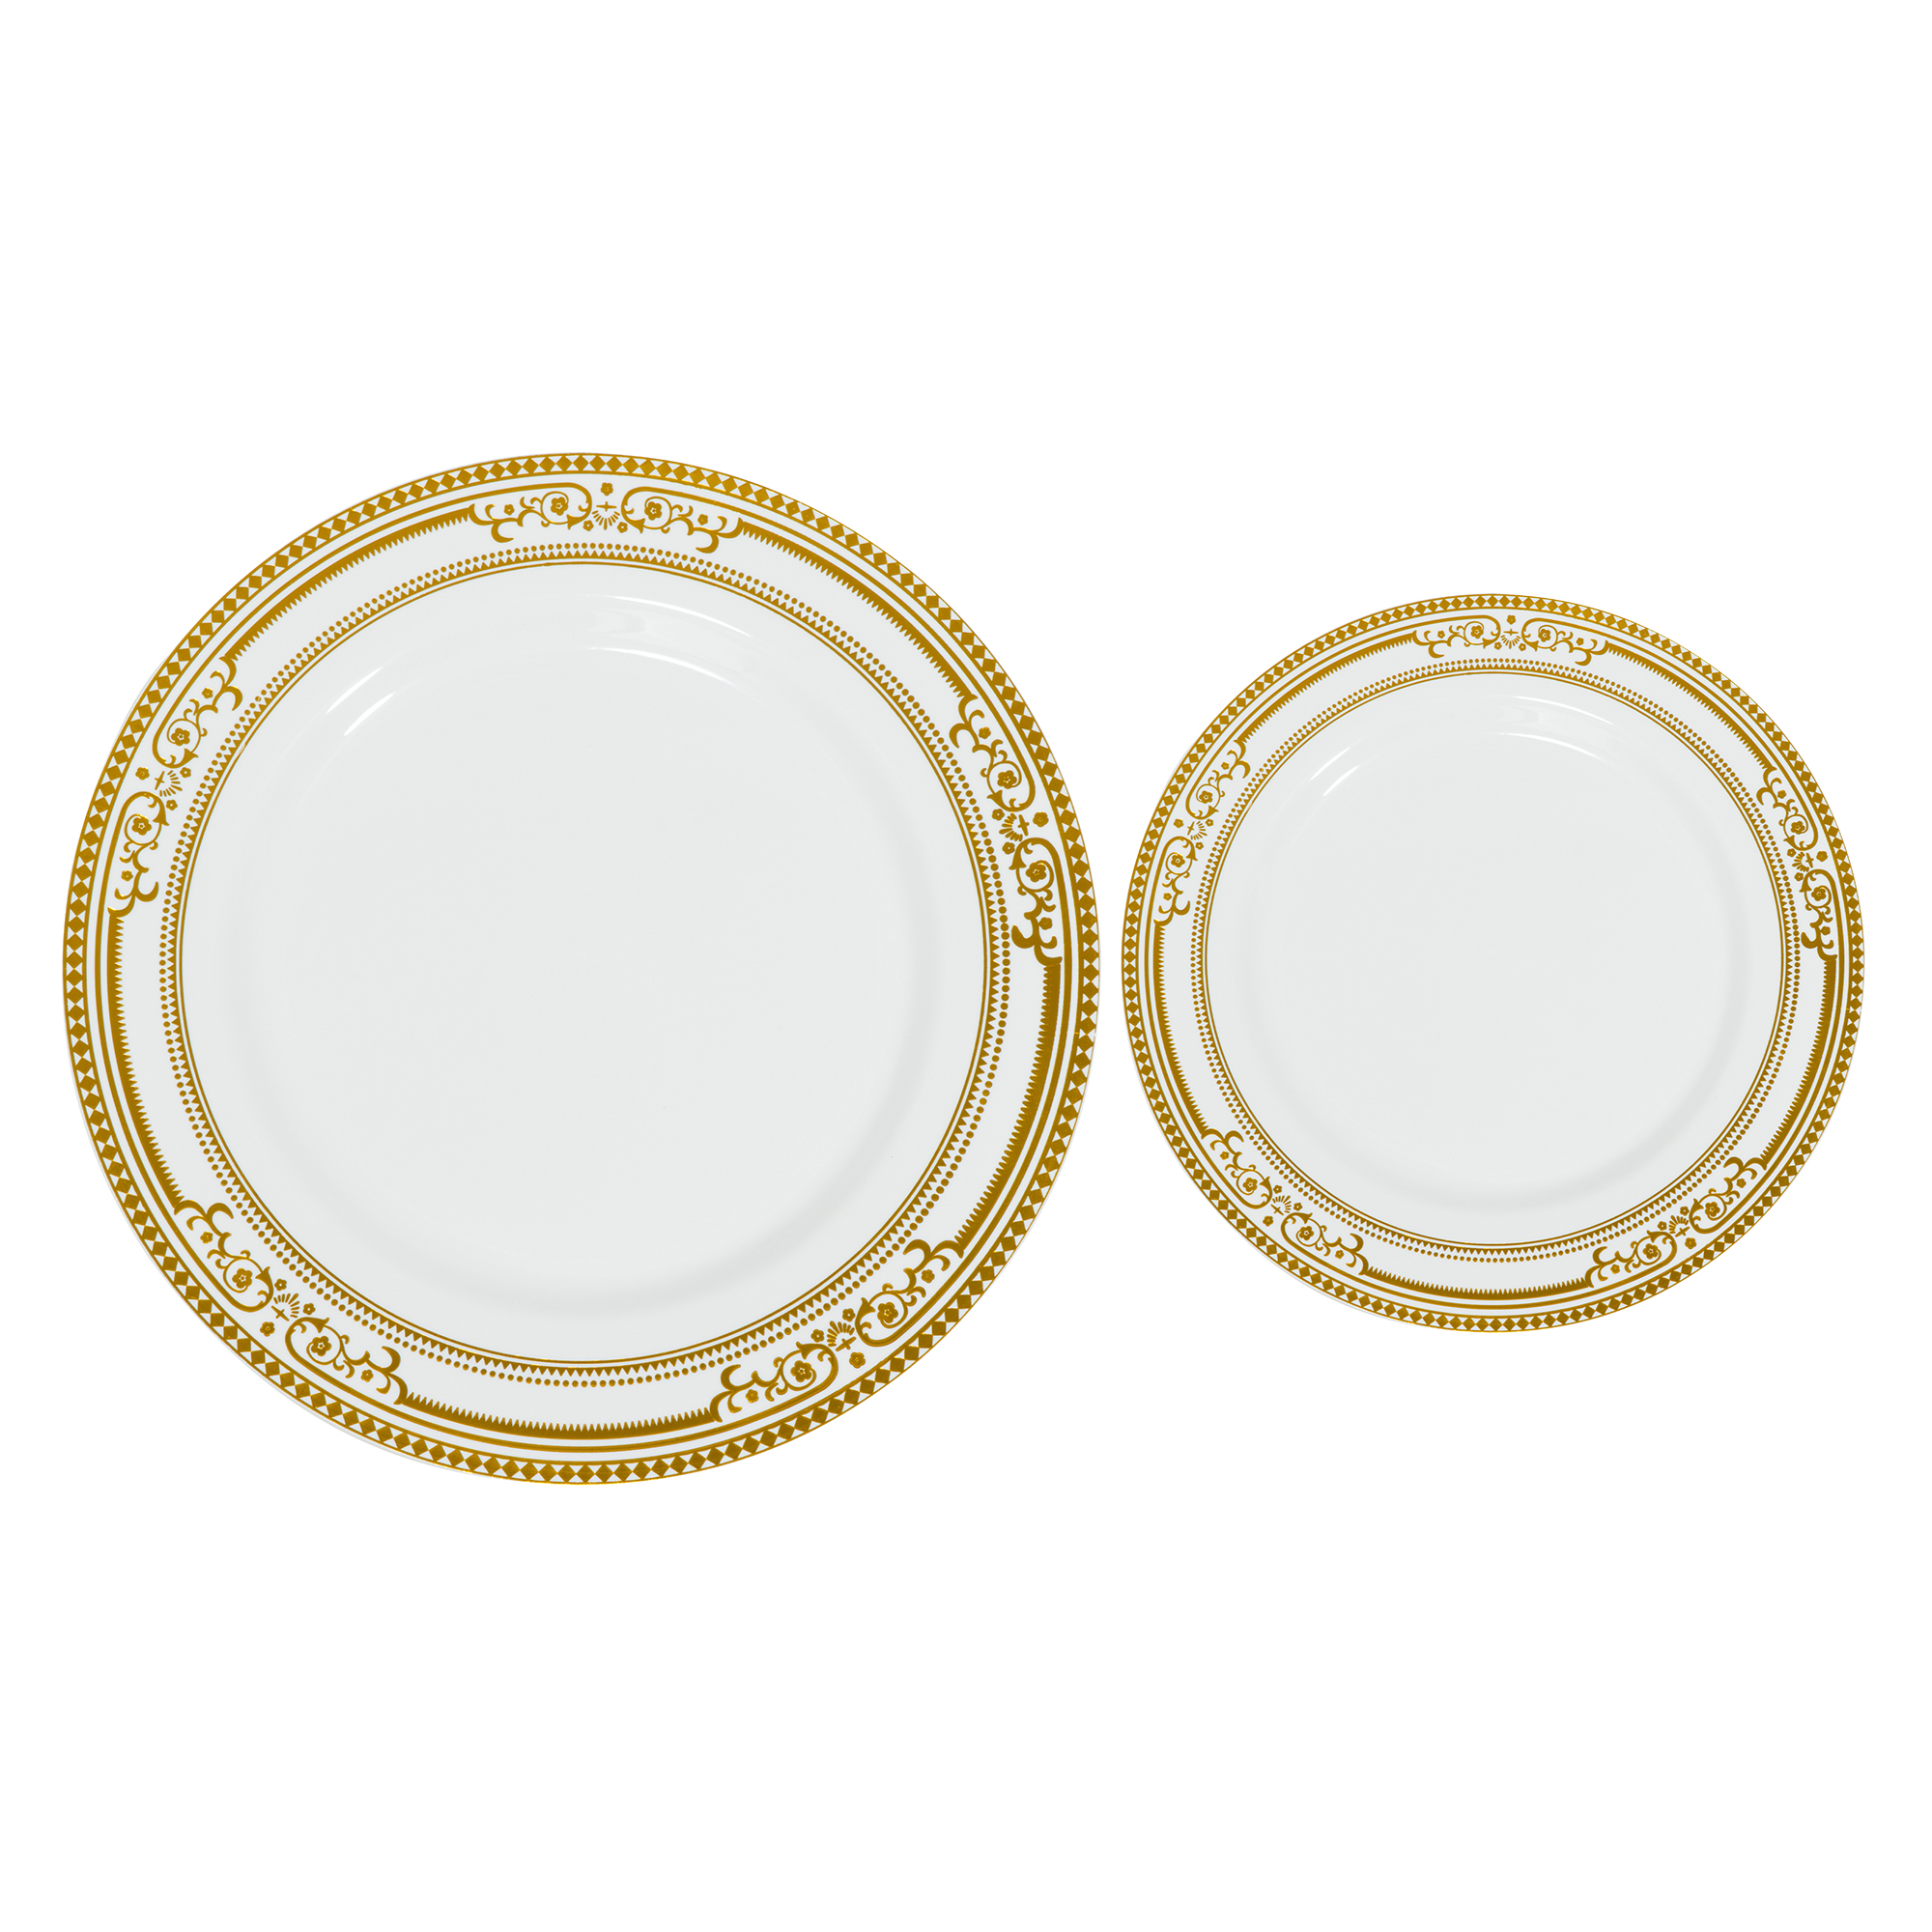 Disposable Deluxe Plate Set 50pc/set - Gold